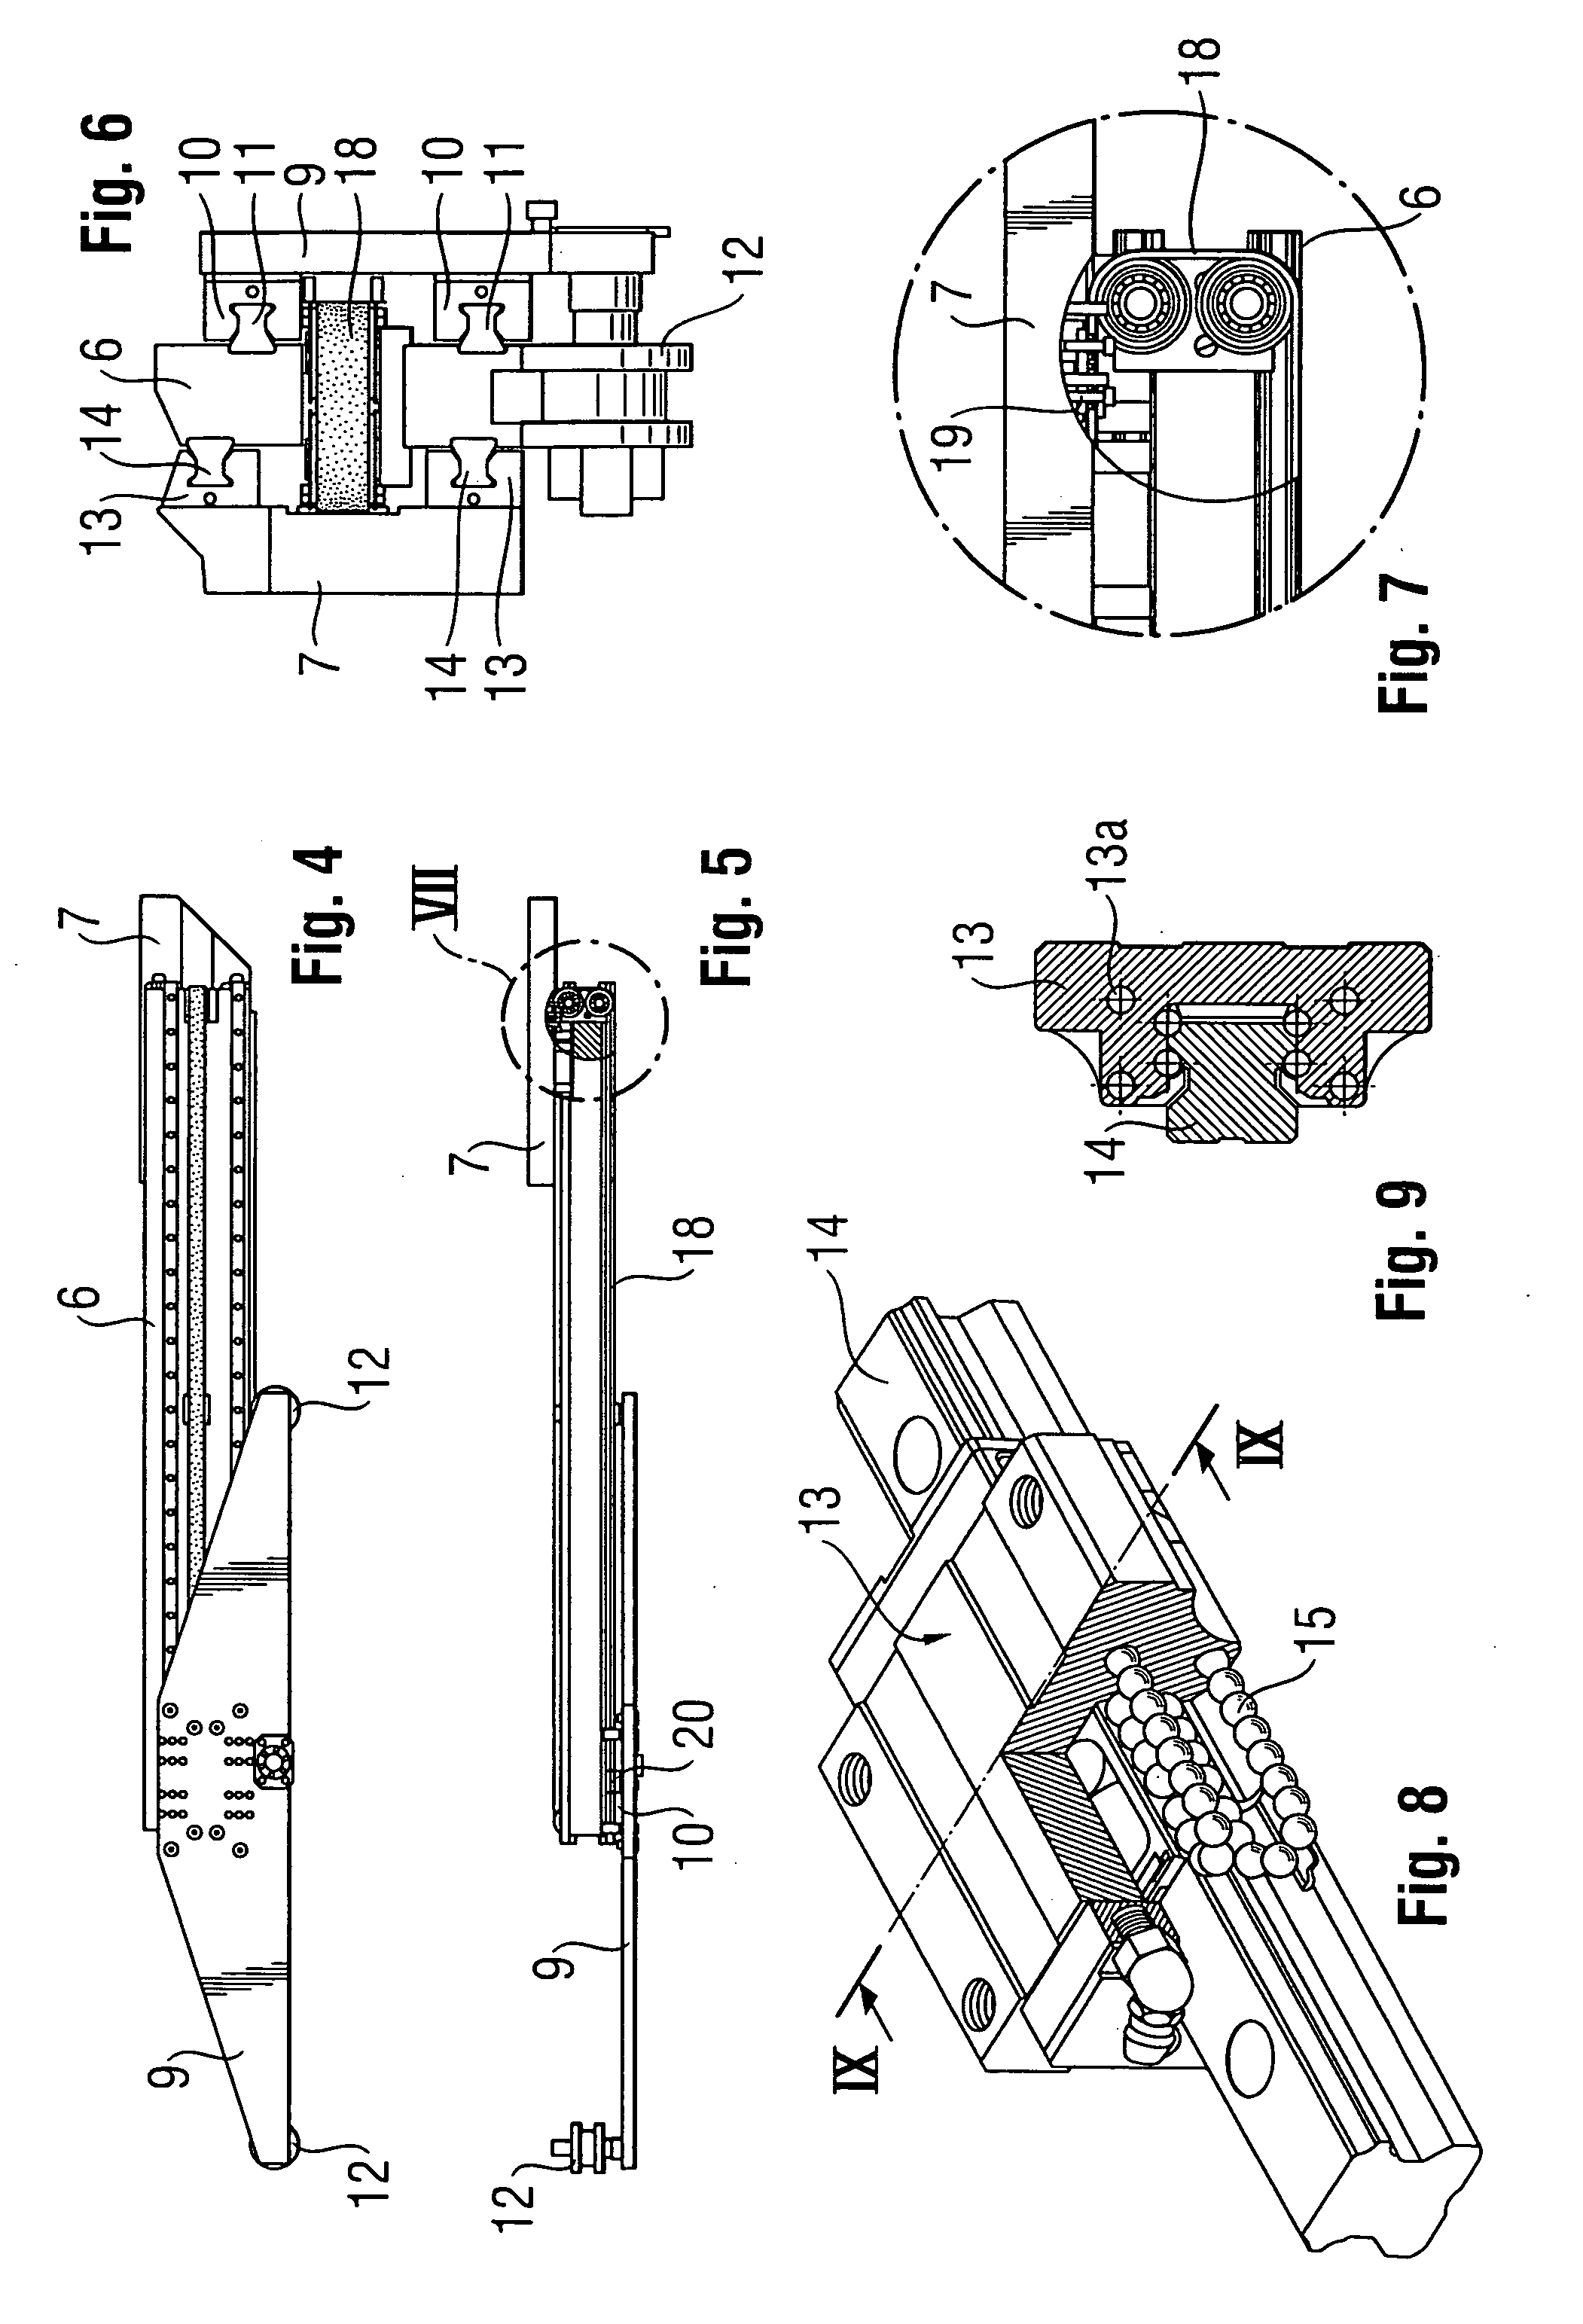 Manipulation device for loading and unloading a shelf